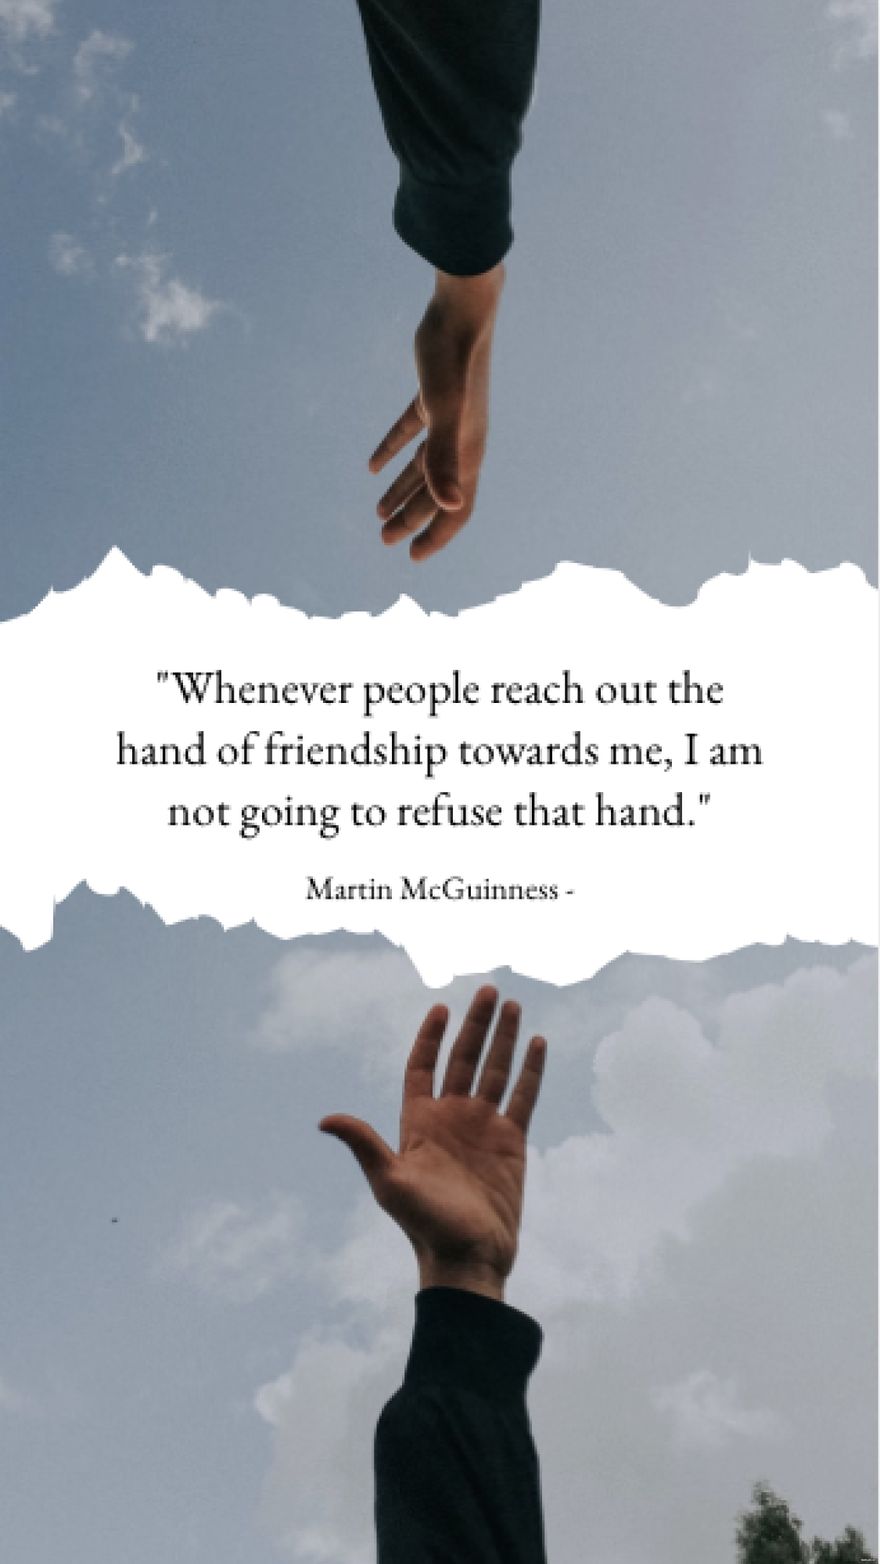 Martin McGuinness - Whenever people reach out the hand of friendship towards me, I am not going to refuse that hand. in JPG